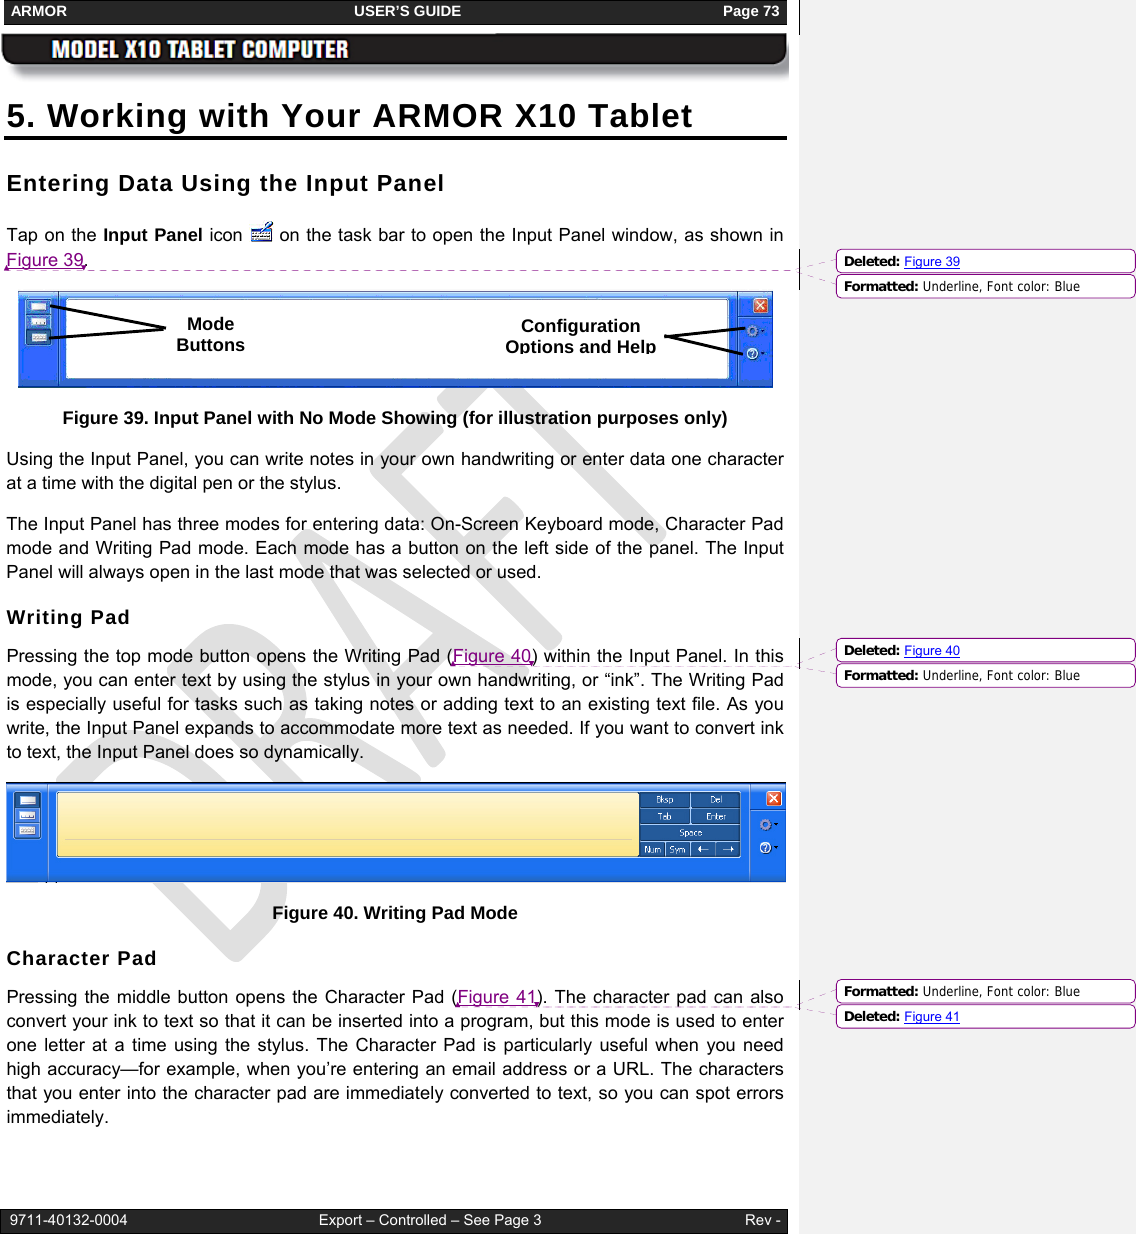 ARMOR                                                                     USER’S GUIDE                                                               Page 73   9711-40132-0004                                              Export – Controlled – See Page 3                                                 Rev - 5. Working with Your ARMOR X10 Tablet Entering Data Using the Input Panel Tap on the Input Panel icon   on the task bar to open the Input Panel window, as shown in Figure 39.   Figure 39. Input Panel with No Mode Showing (for illustration purposes only) Using the Input Panel, you can write notes in your own handwriting or enter data one character at a time with the digital pen or the stylus.   The Input Panel has three modes for entering data: On-Screen Keyboard mode, Character Pad mode and Writing Pad mode. Each mode has a button on the left side of the panel. The Input Panel will always open in the last mode that was selected or used.  Writing Pad Pressing the top mode button opens the Writing Pad (Figure 40) within the Input Panel. In this mode, you can enter text by using the stylus in your own handwriting, or “ink”. The Writing Pad is especially useful for tasks such as taking notes or adding text to an existing text file. As you write, the Input Panel expands to accommodate more text as needed. If you want to convert ink to text, the Input Panel does so dynamically.  Figure 40. Writing Pad Mode Character Pad Pressing the middle button opens the Character Pad (Figure 41). The character pad can also convert your ink to text so that it can be inserted into a program, but this mode is used to enter one letter at a time using the stylus. The Character Pad is particularly useful when you need high accuracy—for example, when you’re entering an email address or a URL. The characters that you enter into the character pad are immediately converted to text, so you can spot errors immediately.  Mode Buttons Configuration Options and HelpFormatted: Underline, Font color: BlueDeleted: Figure 39Formatted: Underline, Font color: BlueDeleted: Figure 40Formatted: Underline, Font color: BlueDeleted: Figure 41